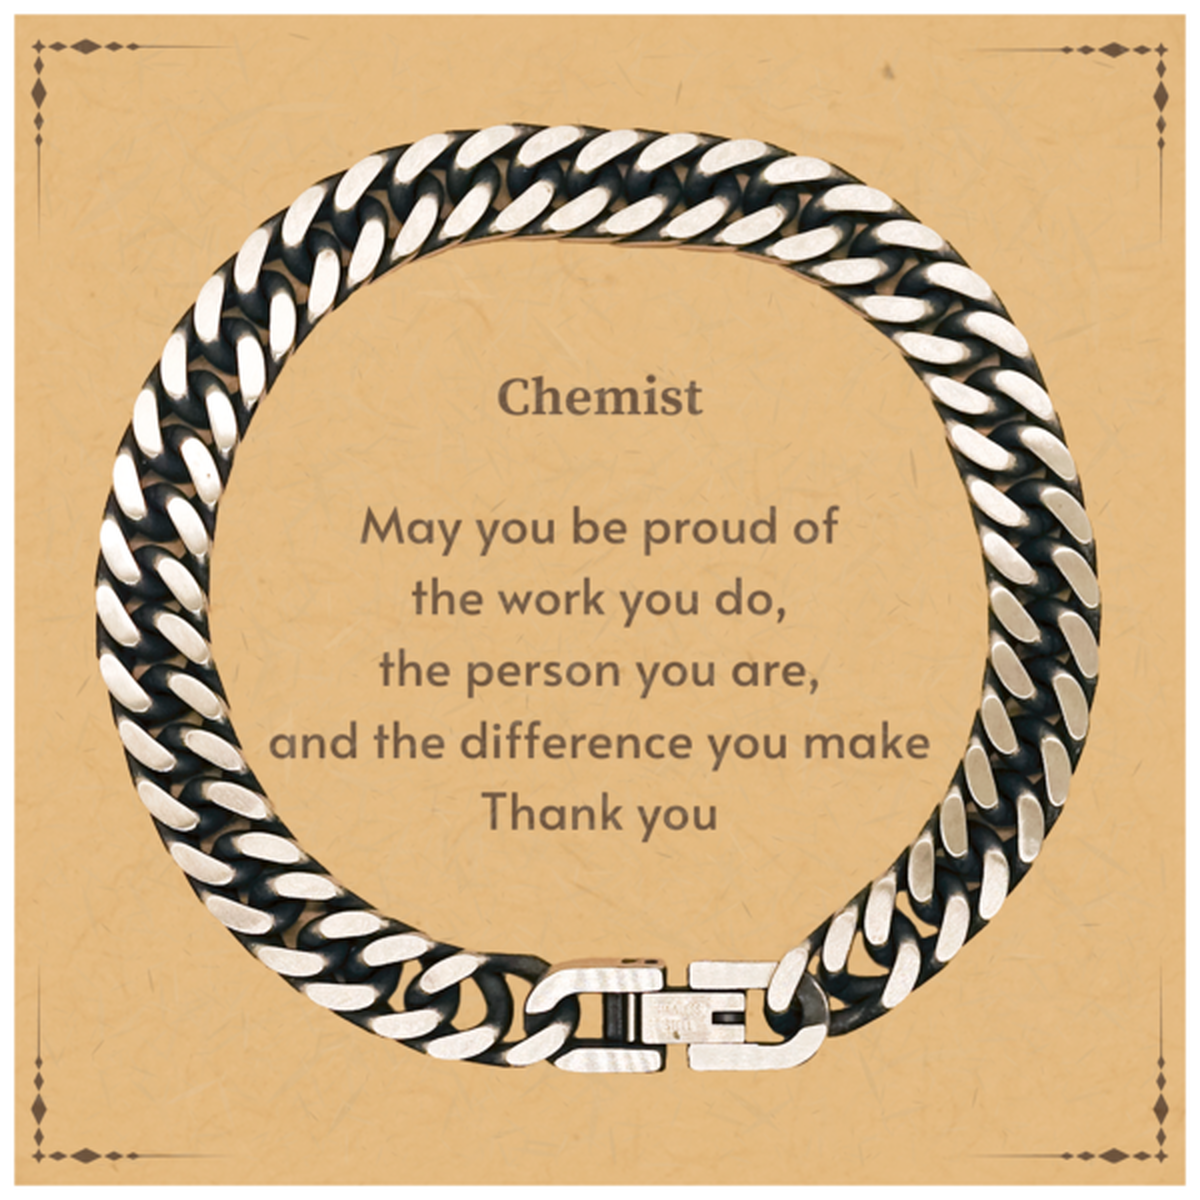 Heartwarming Cuban Link Chain Bracelet Retirement Coworkers Gifts for Chemist, Chemist May You be proud of the work you do, the person you are Gifts for Boss Men Women Friends